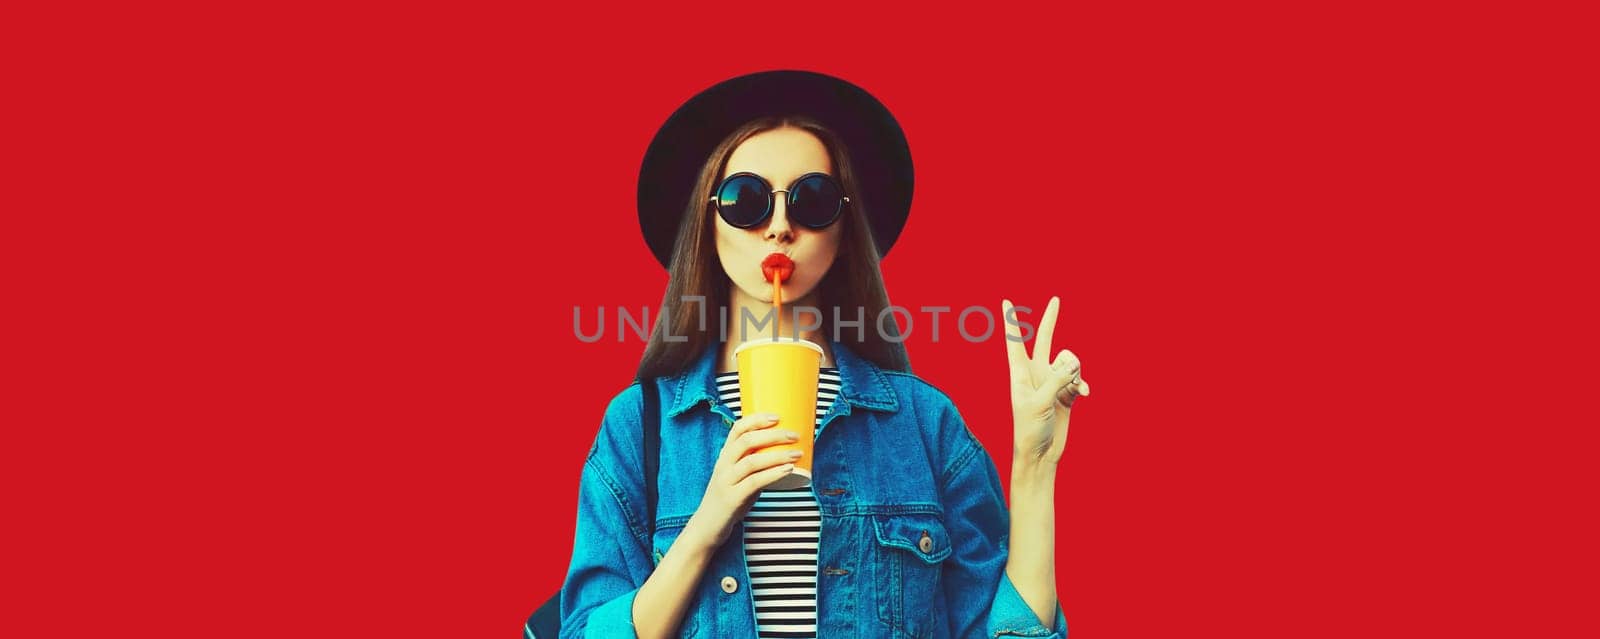 Stylish young woman drinking juice wearing black round hat, jean jacket on red background, blank copy space for advertising text